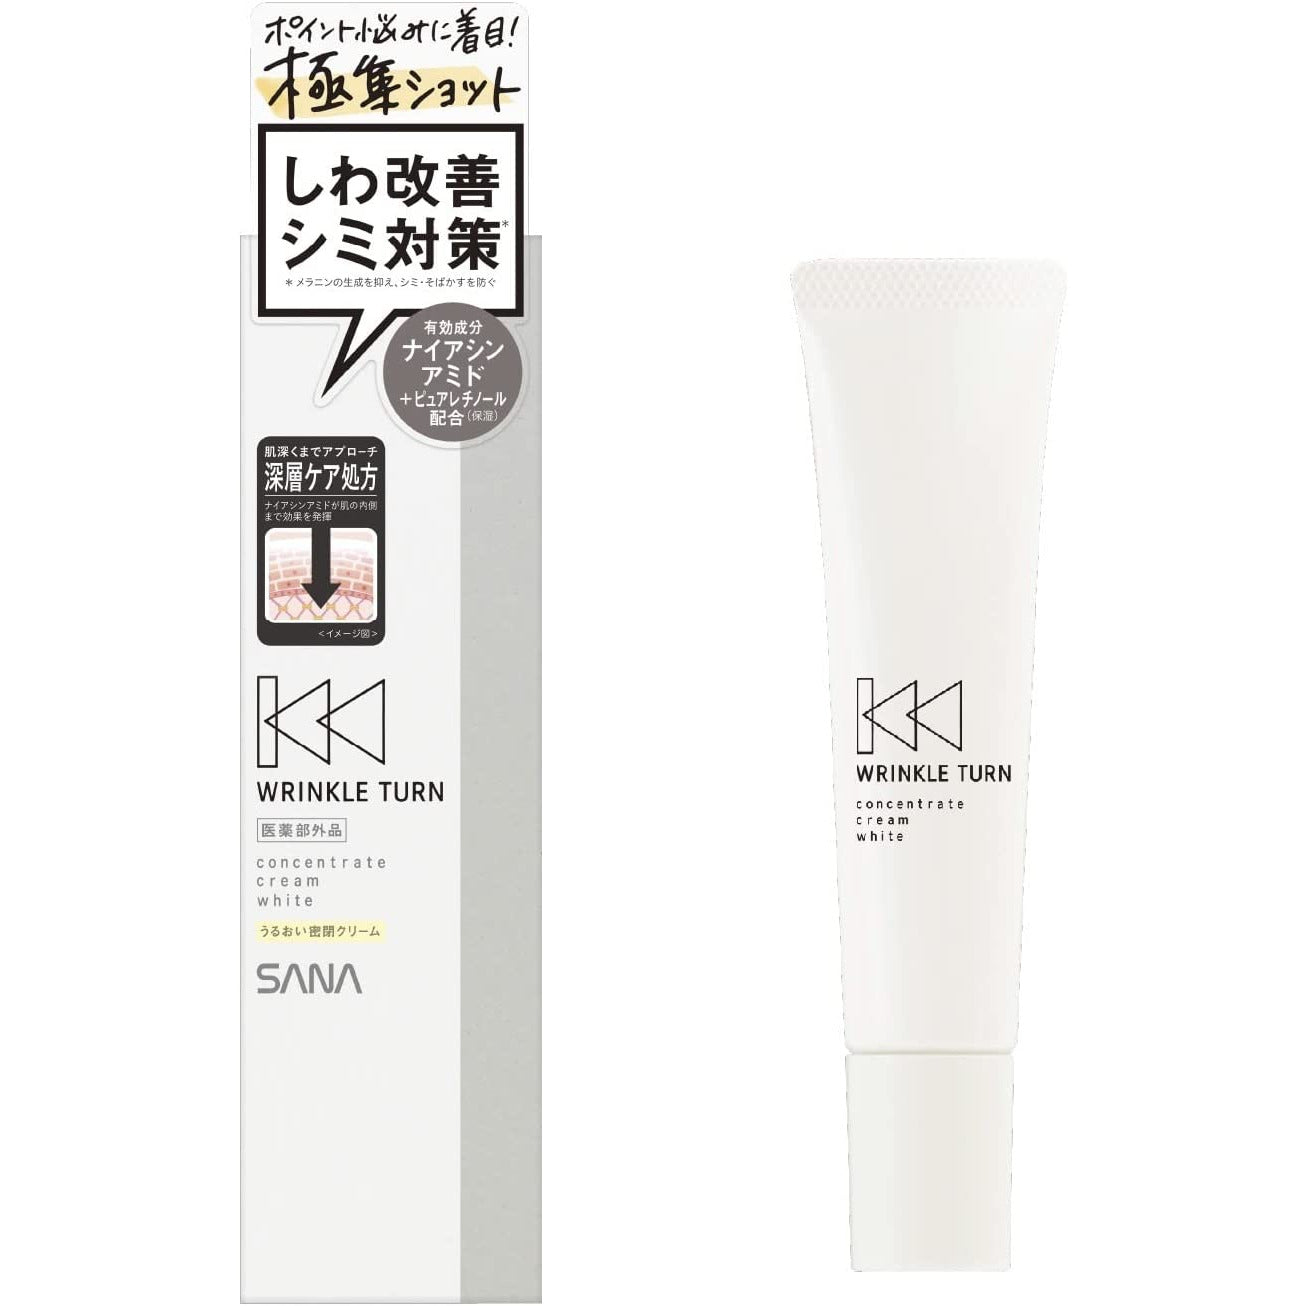 SANA Wrinkle Turn Concentrate Cream White 20G